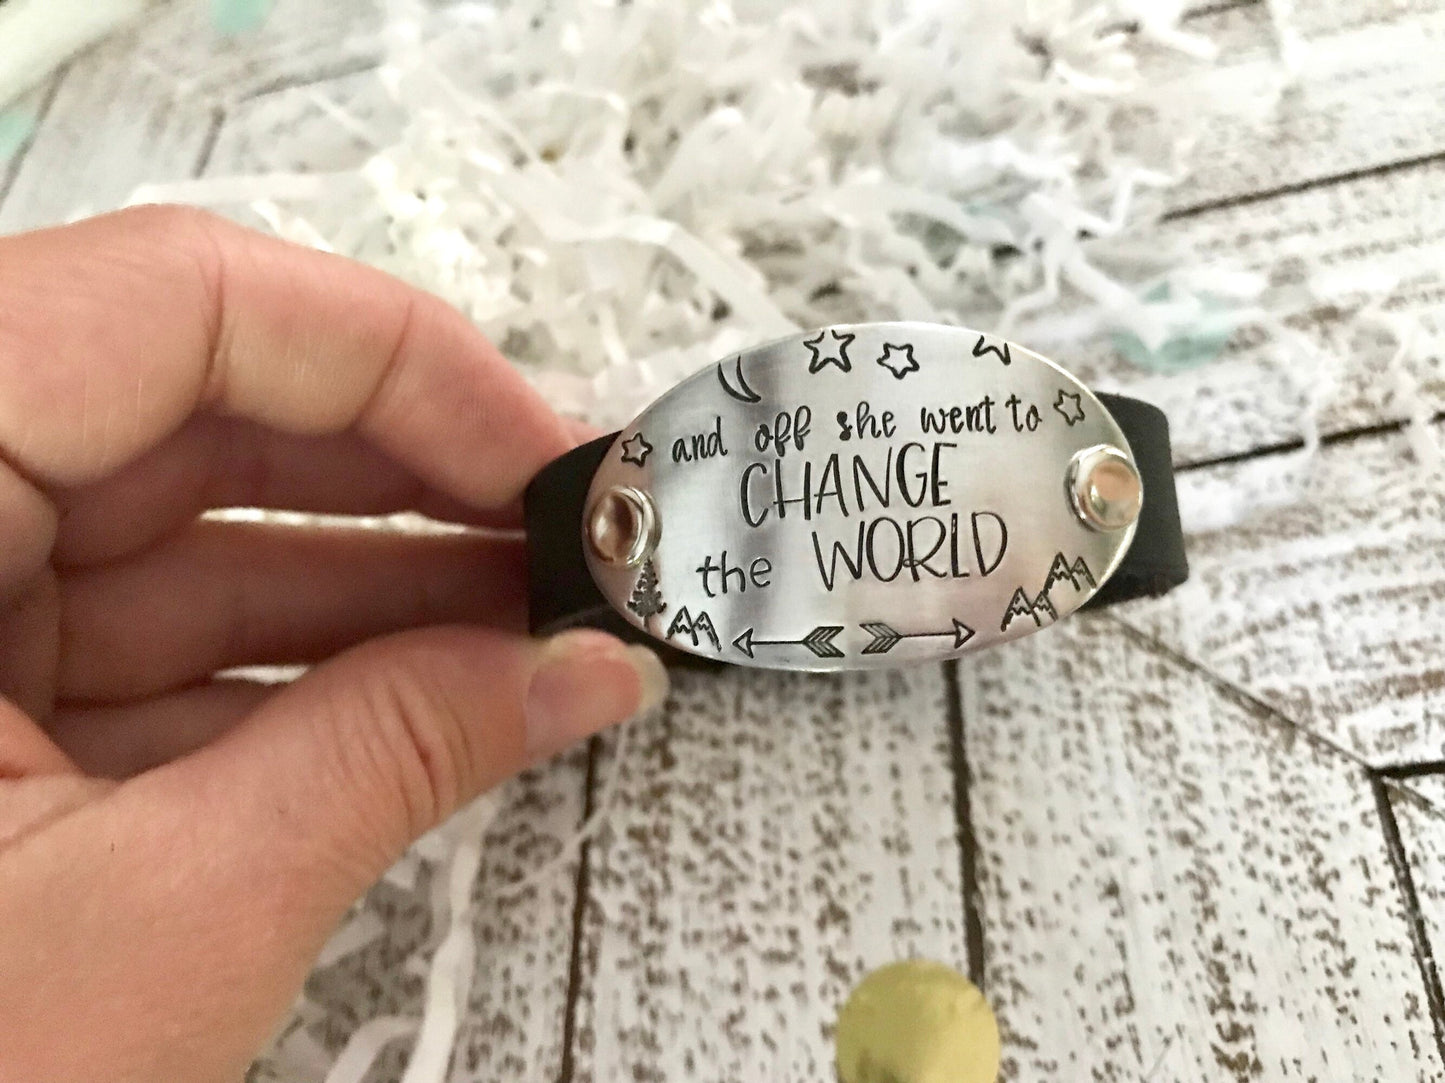 AND OFF SHE went to change the world--change the world jewelry--graduation jewelry--encouragement gift--inspirational jewelry--motivational